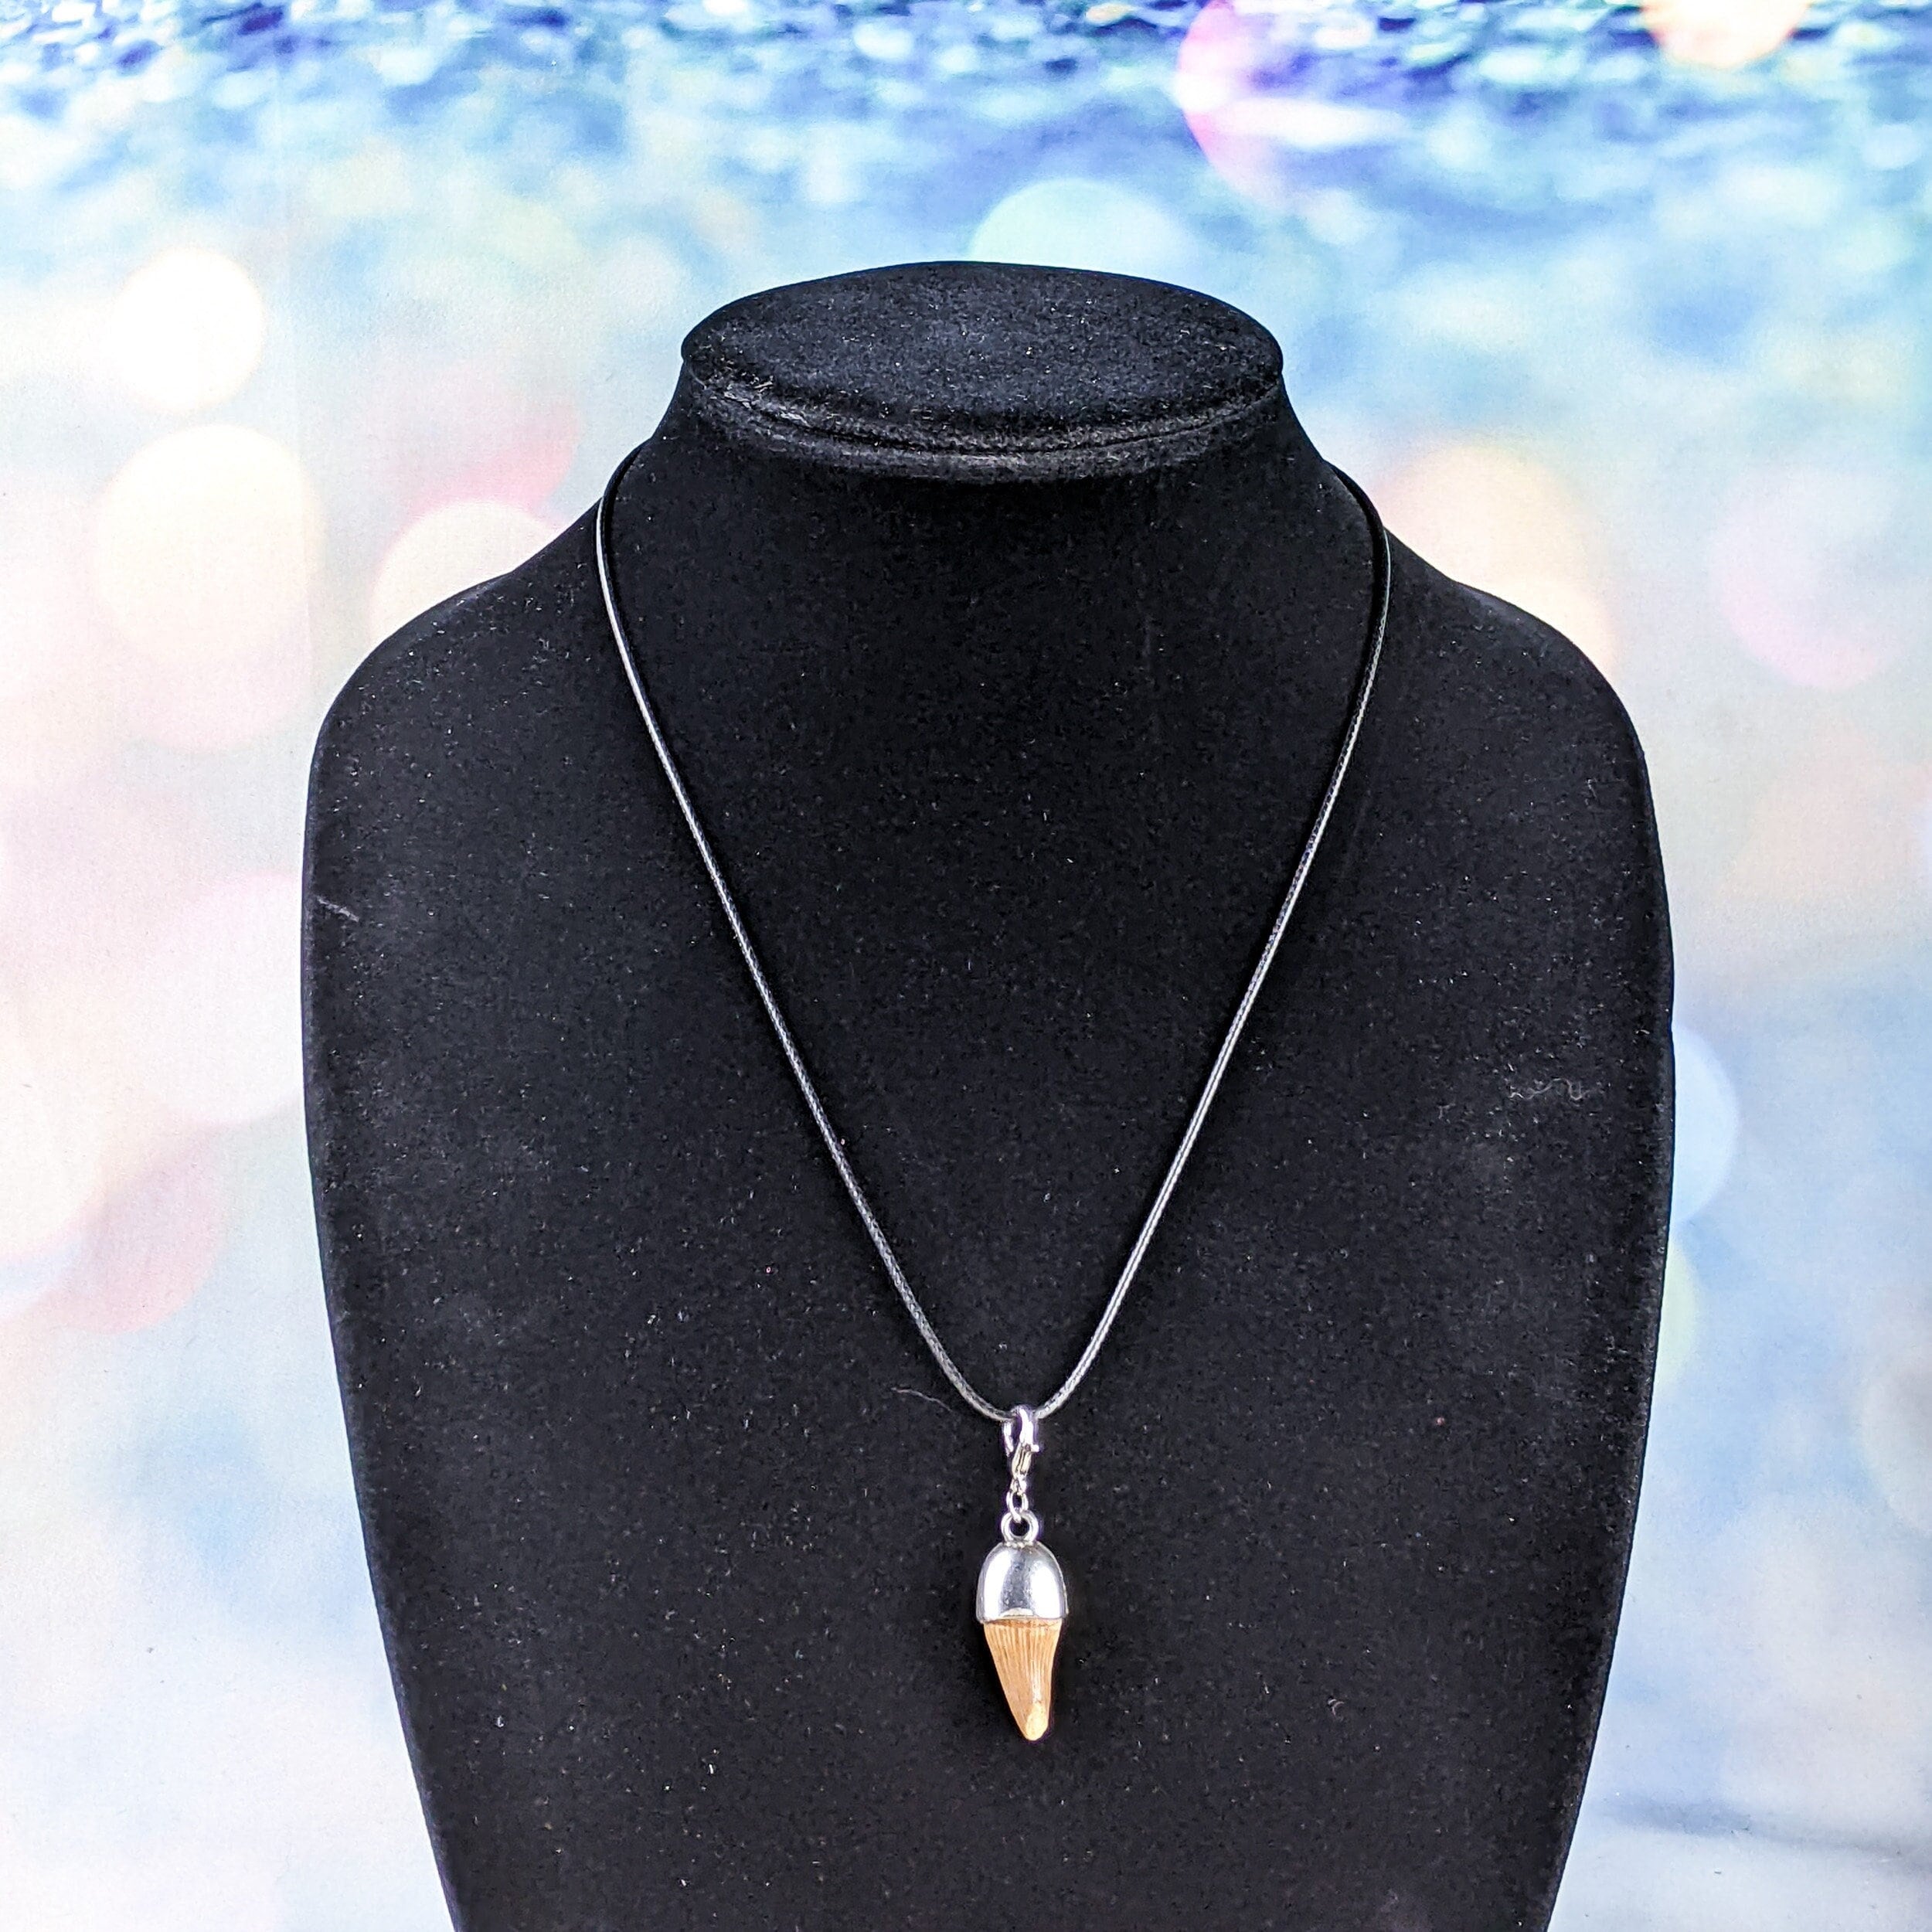 Mosasaur Tooth Pendant